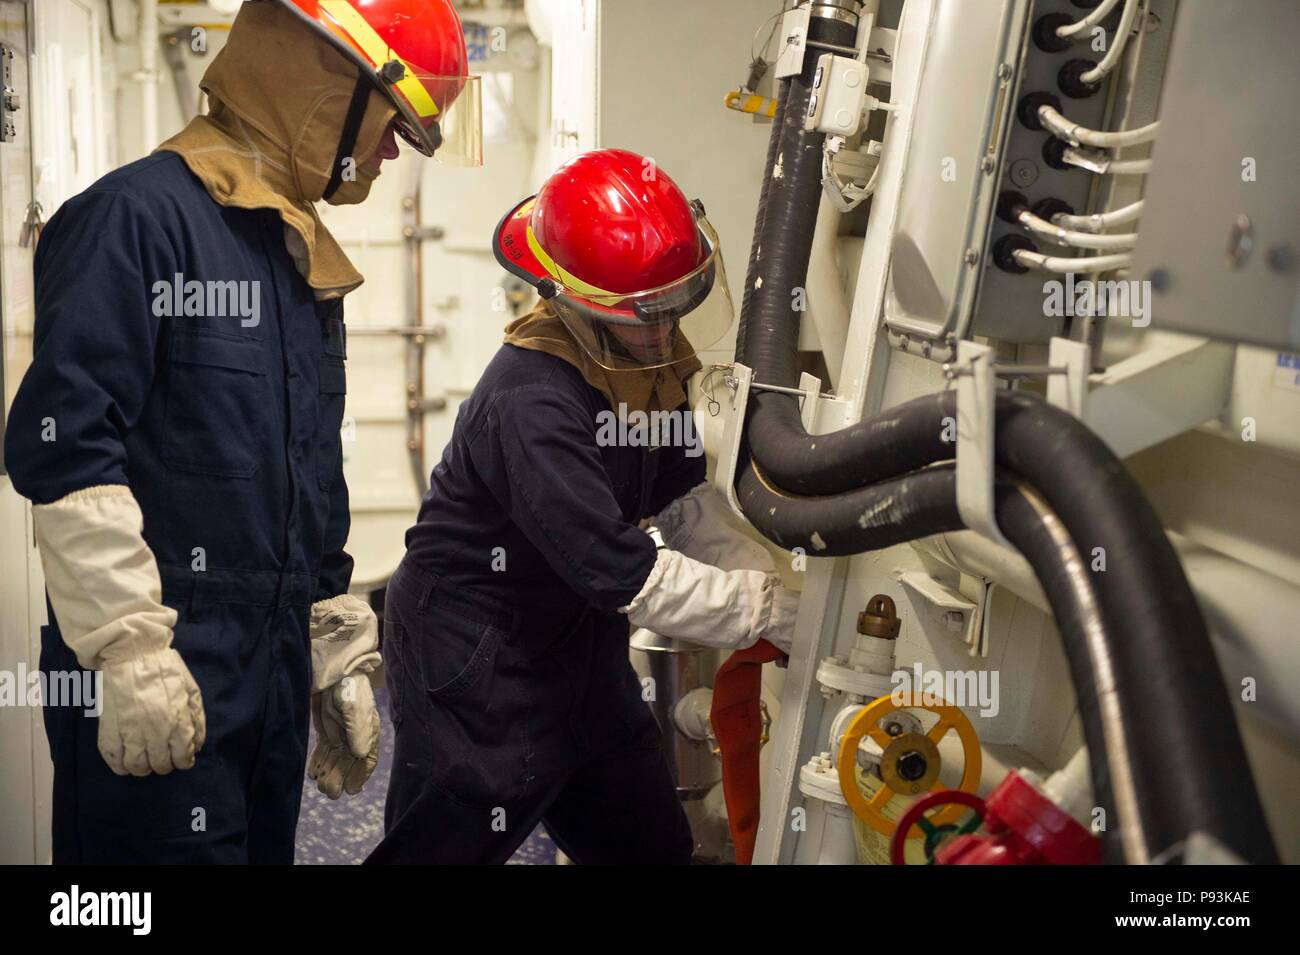 180706-N-JO245-063 ATLANTIC OCEAN (July 6, 2018) Damage Controlman 2nd Richard Barker, left, observes as Yeoman 3rd Class Seth Wyatt connects a hose to a overboard discharge valve during a general quarters drill aboard the guided-missile destroyer USS Forrest Sherman (DDG 98). Forrest Sherman is underway for a scheduled deployment as part of the Harry S. Truman Carrier Strike Group. With Harry S. Truman as the flagship, deploying strike group assets include staffs, ships and aircraft of Carrier Strike Group (CSG) 8, Destroyer Squadron (DESRON) 28 and Carrier Air Wing (CVW) 1; as well as the Sa Stock Photo